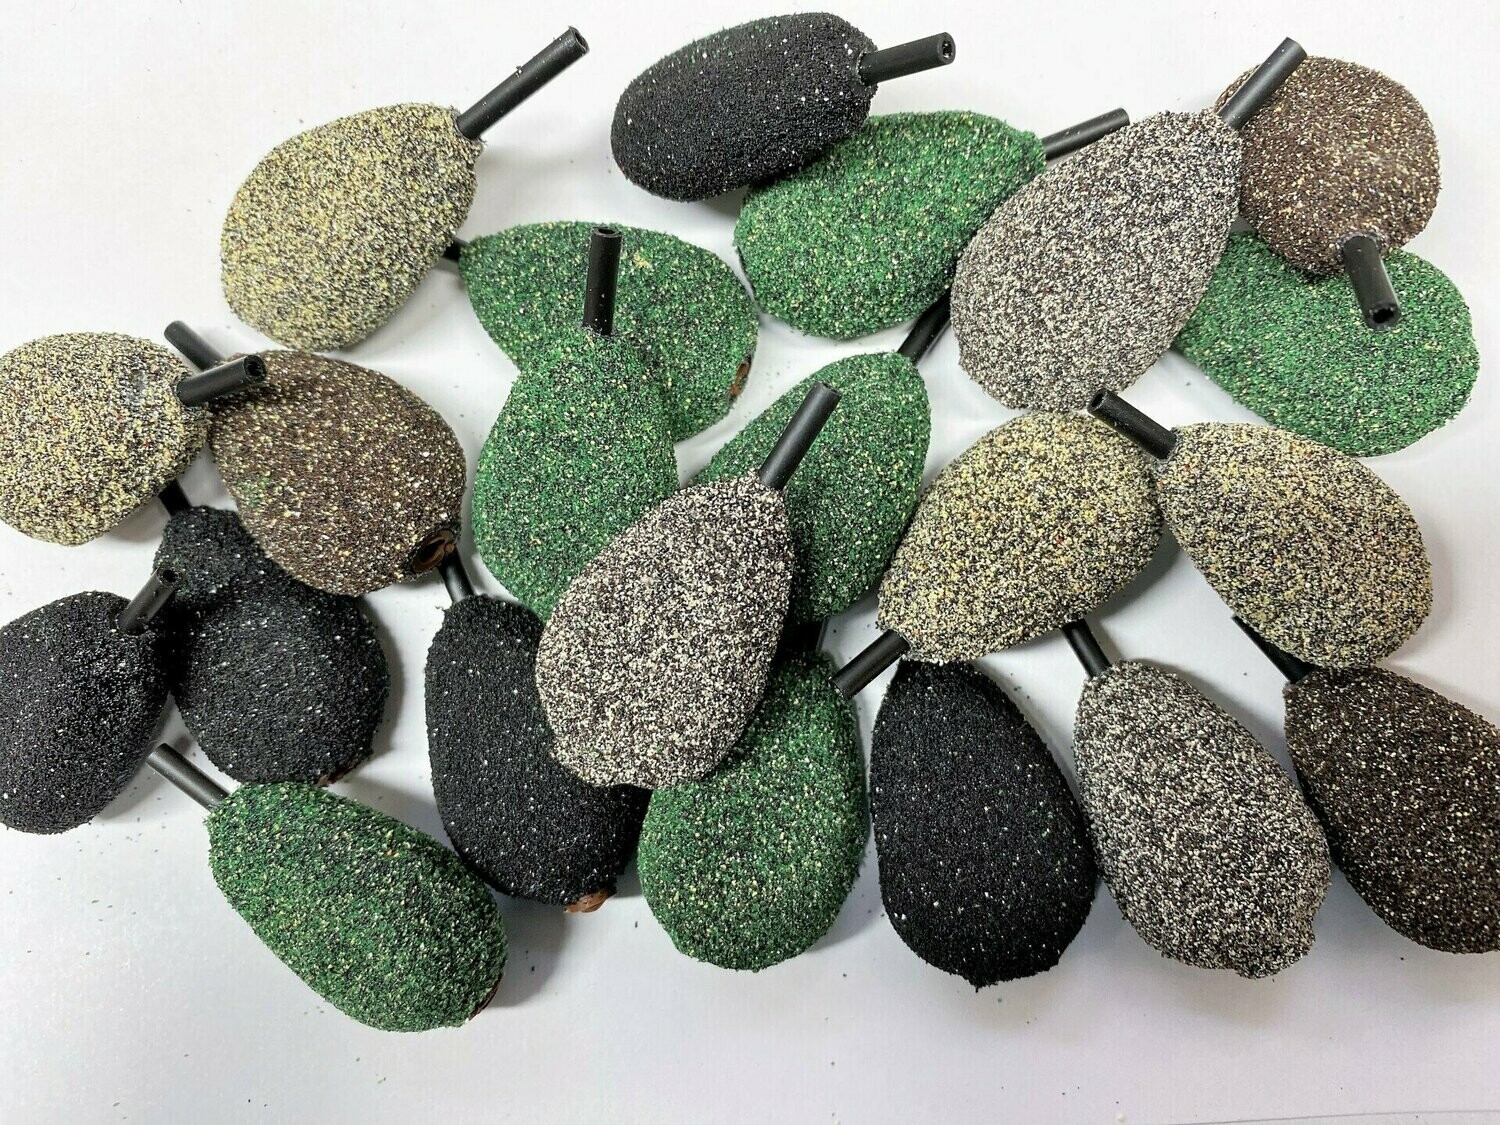 IN-LINE FLAT LEAD WEIGHTS SINKERS textured smooth Sea/Carp fishing tackle  (sold in pack of 60) free postage